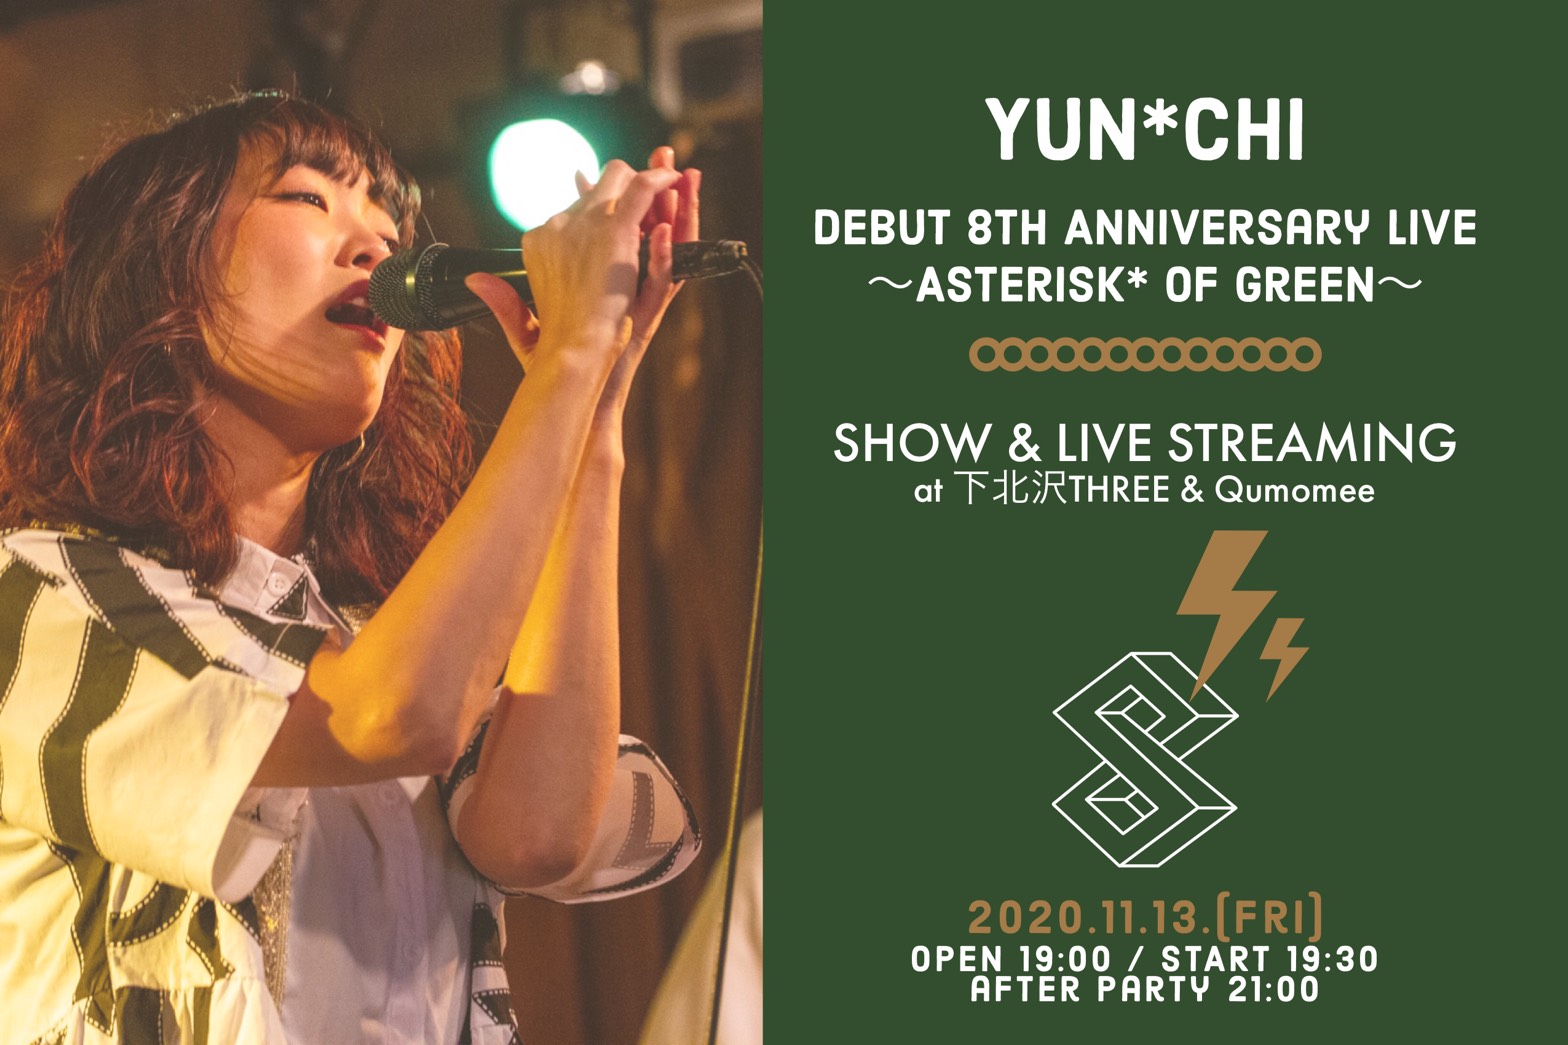 Yun*chi debut 8th Anniversary LIVE ～Asterisk* of Green～